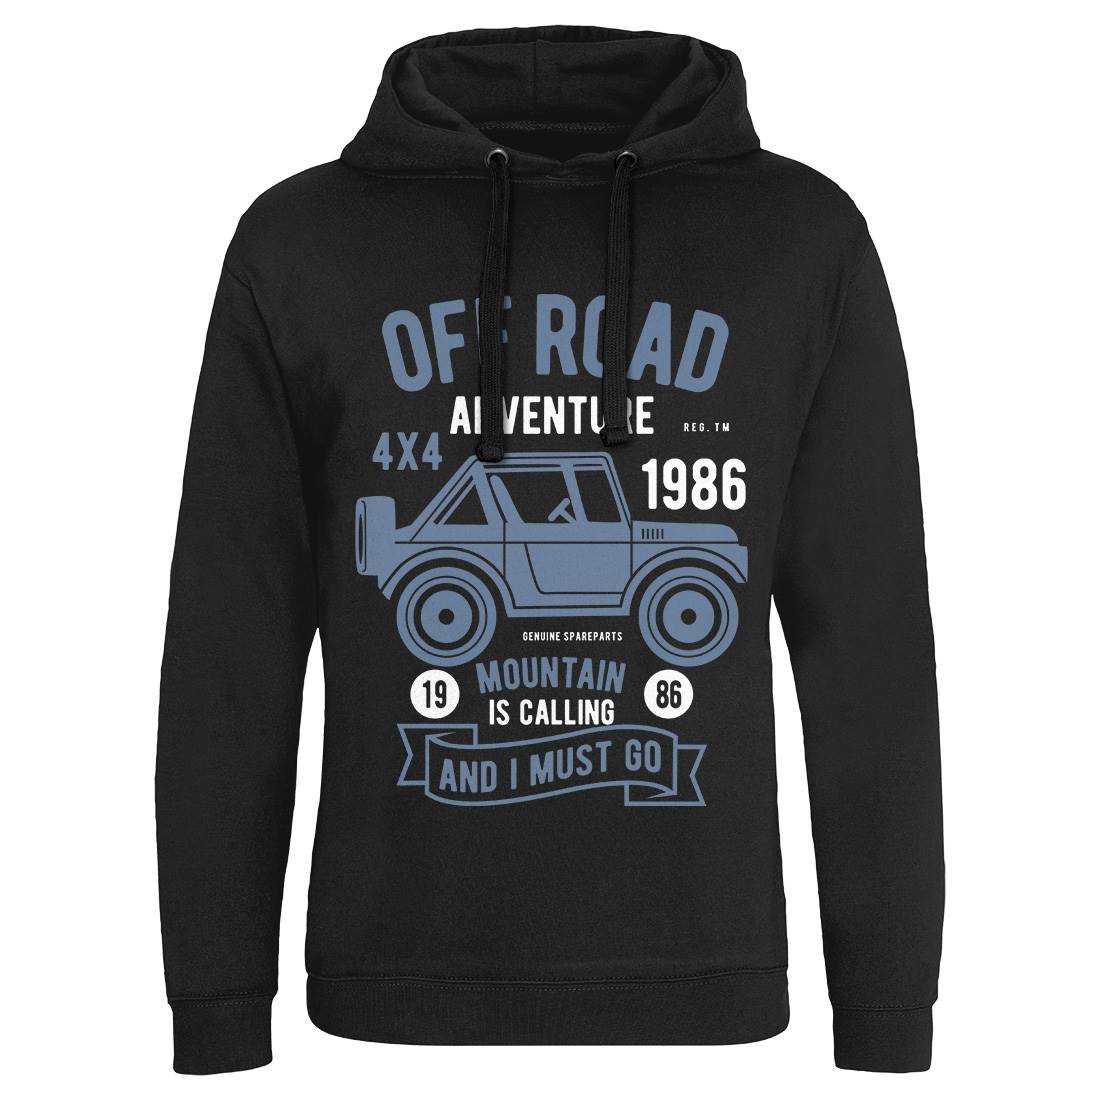 Off Road Adventure Mens Hoodie Without Pocket Cars B432